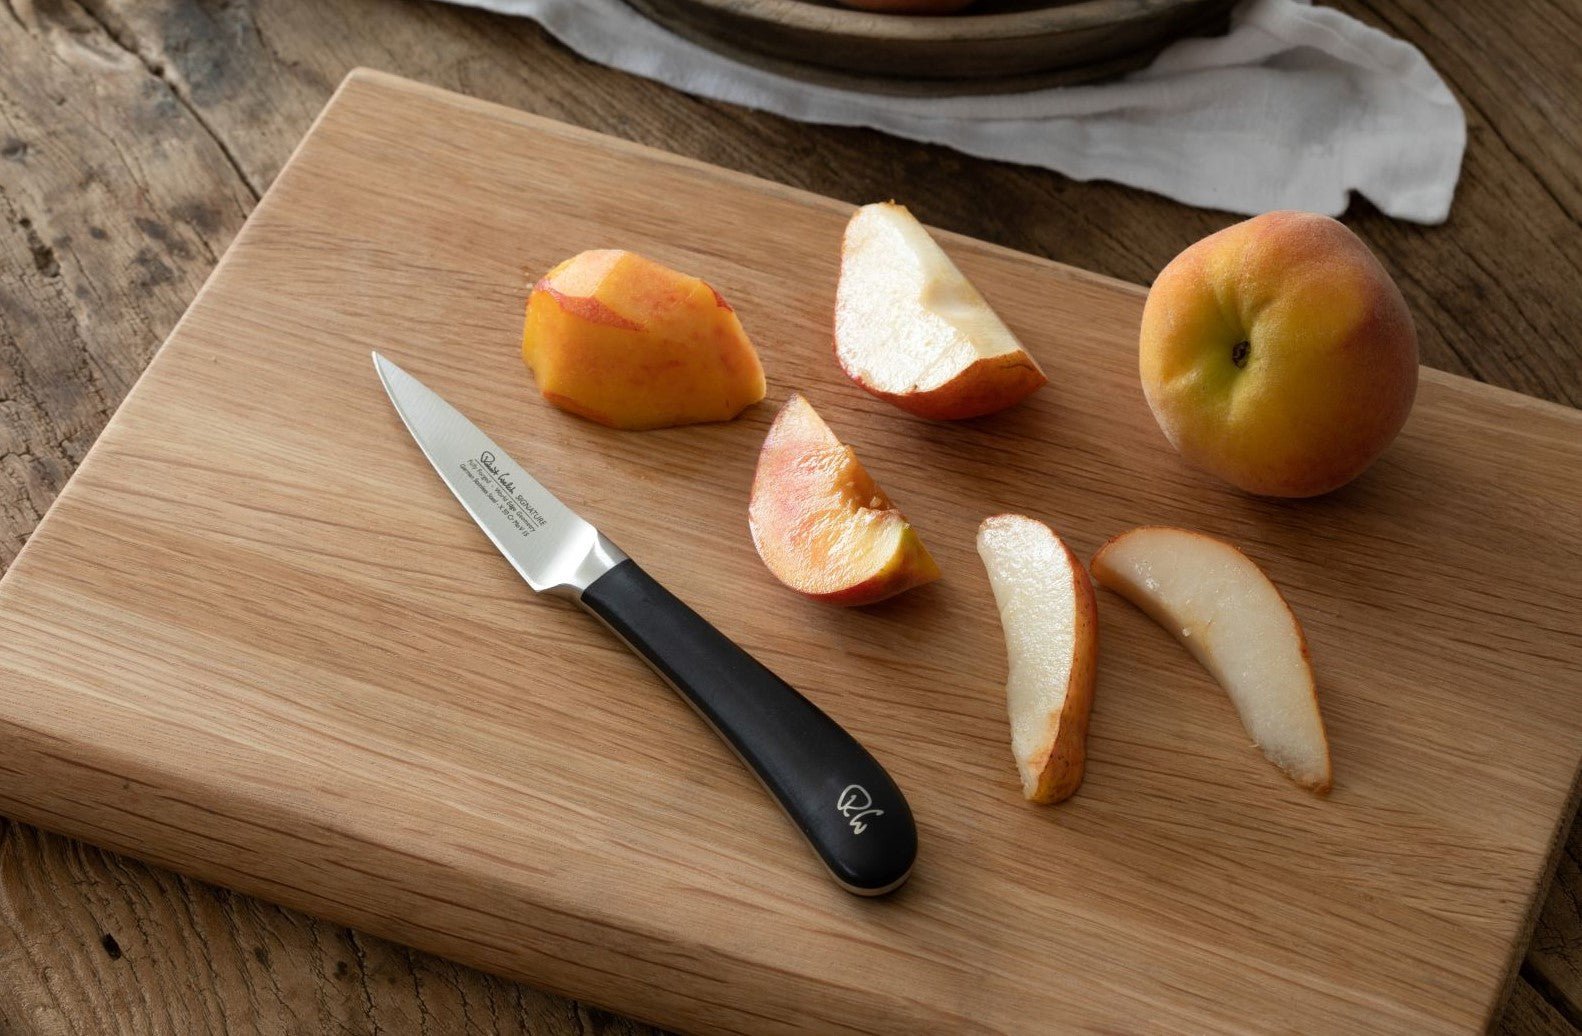 Robert Welch Signature 8cm Vegetable / Paring Knife - SIGSA2094V - The Cotswold Knife Company